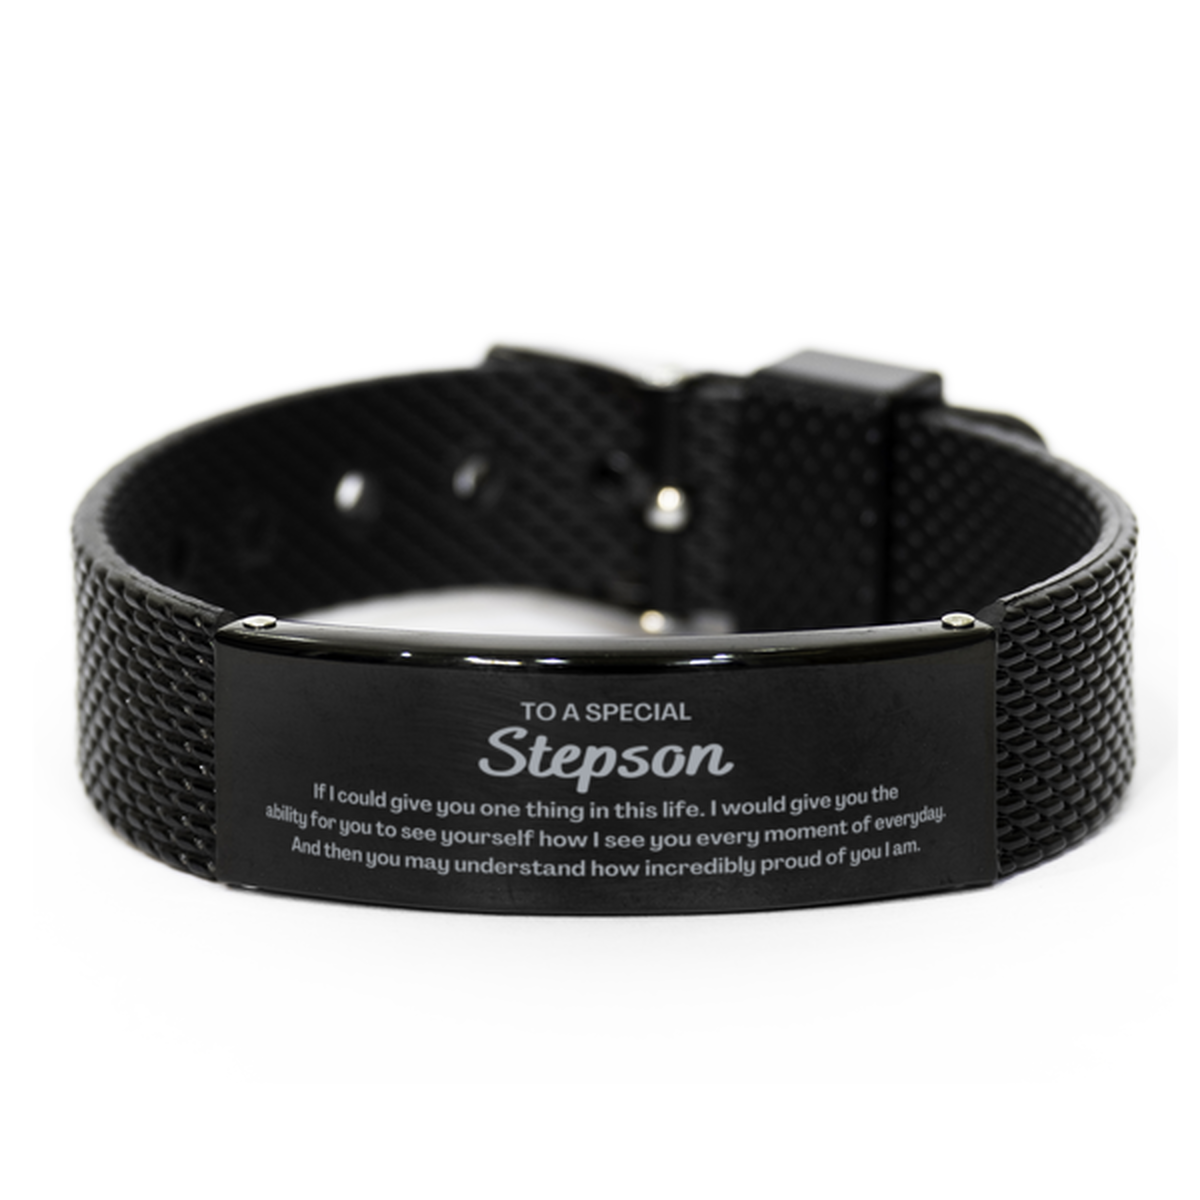 To My Stepson Black Shark Mesh Bracelet, Gifts For Stepson Engraved, Inspirational Gifts for Christmas Birthday, Epic Gifts for Stepson To A Special Stepson how incredibly proud of you I am